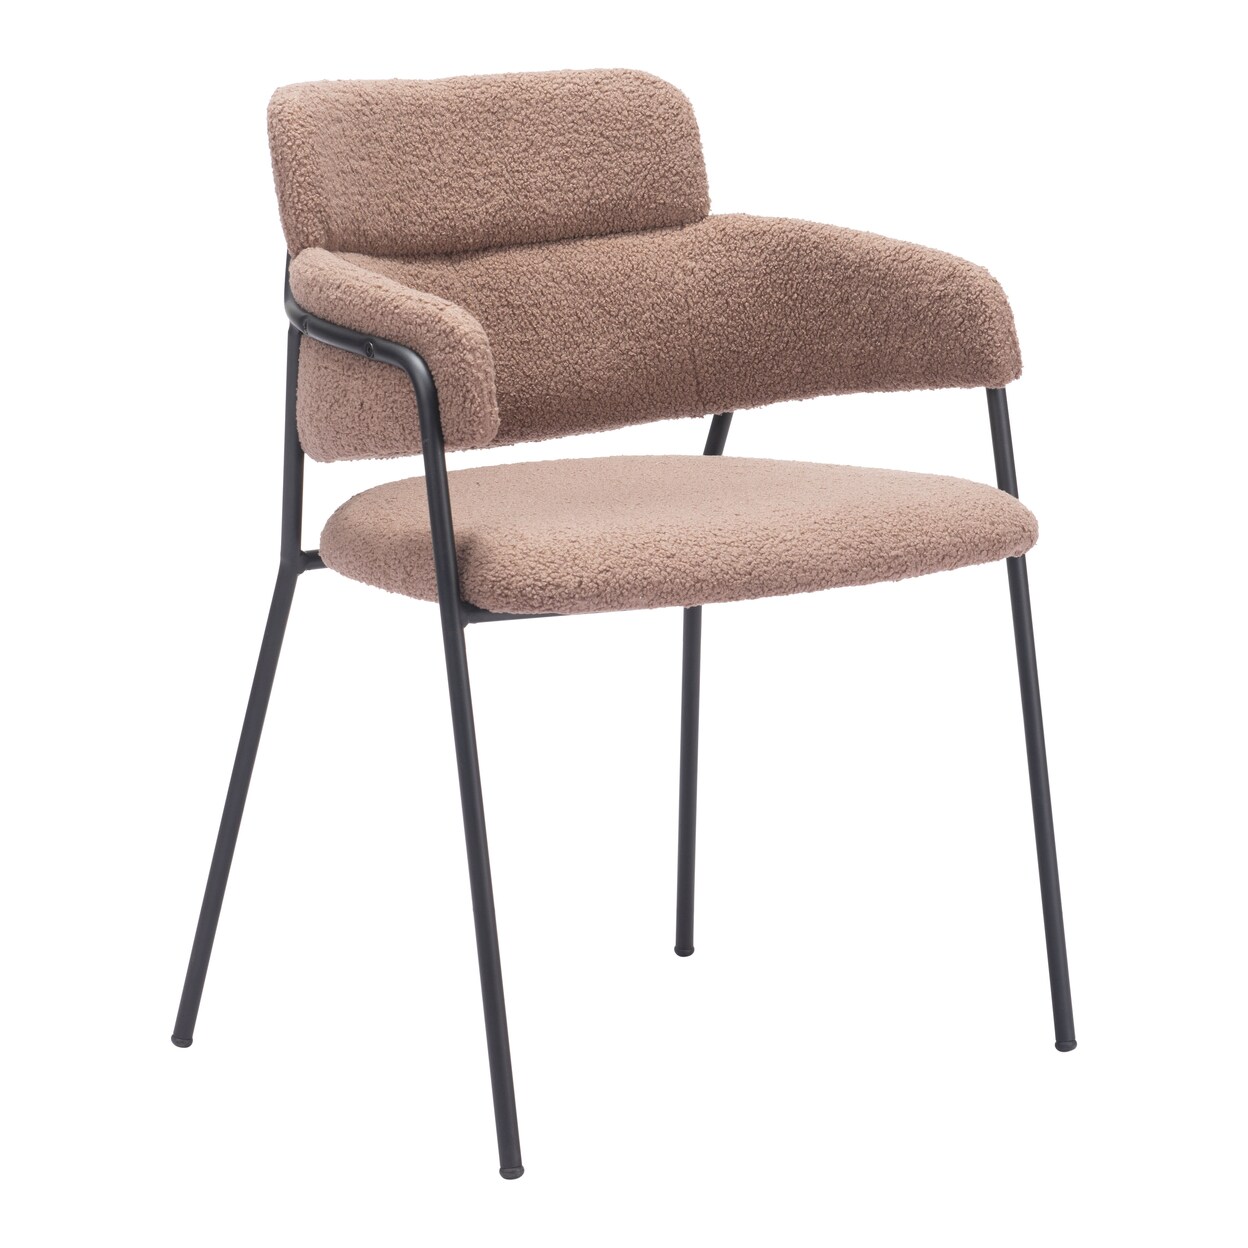 Zuo Modern Contemporary Inc. Marcel Dining Chair (Set of 2)